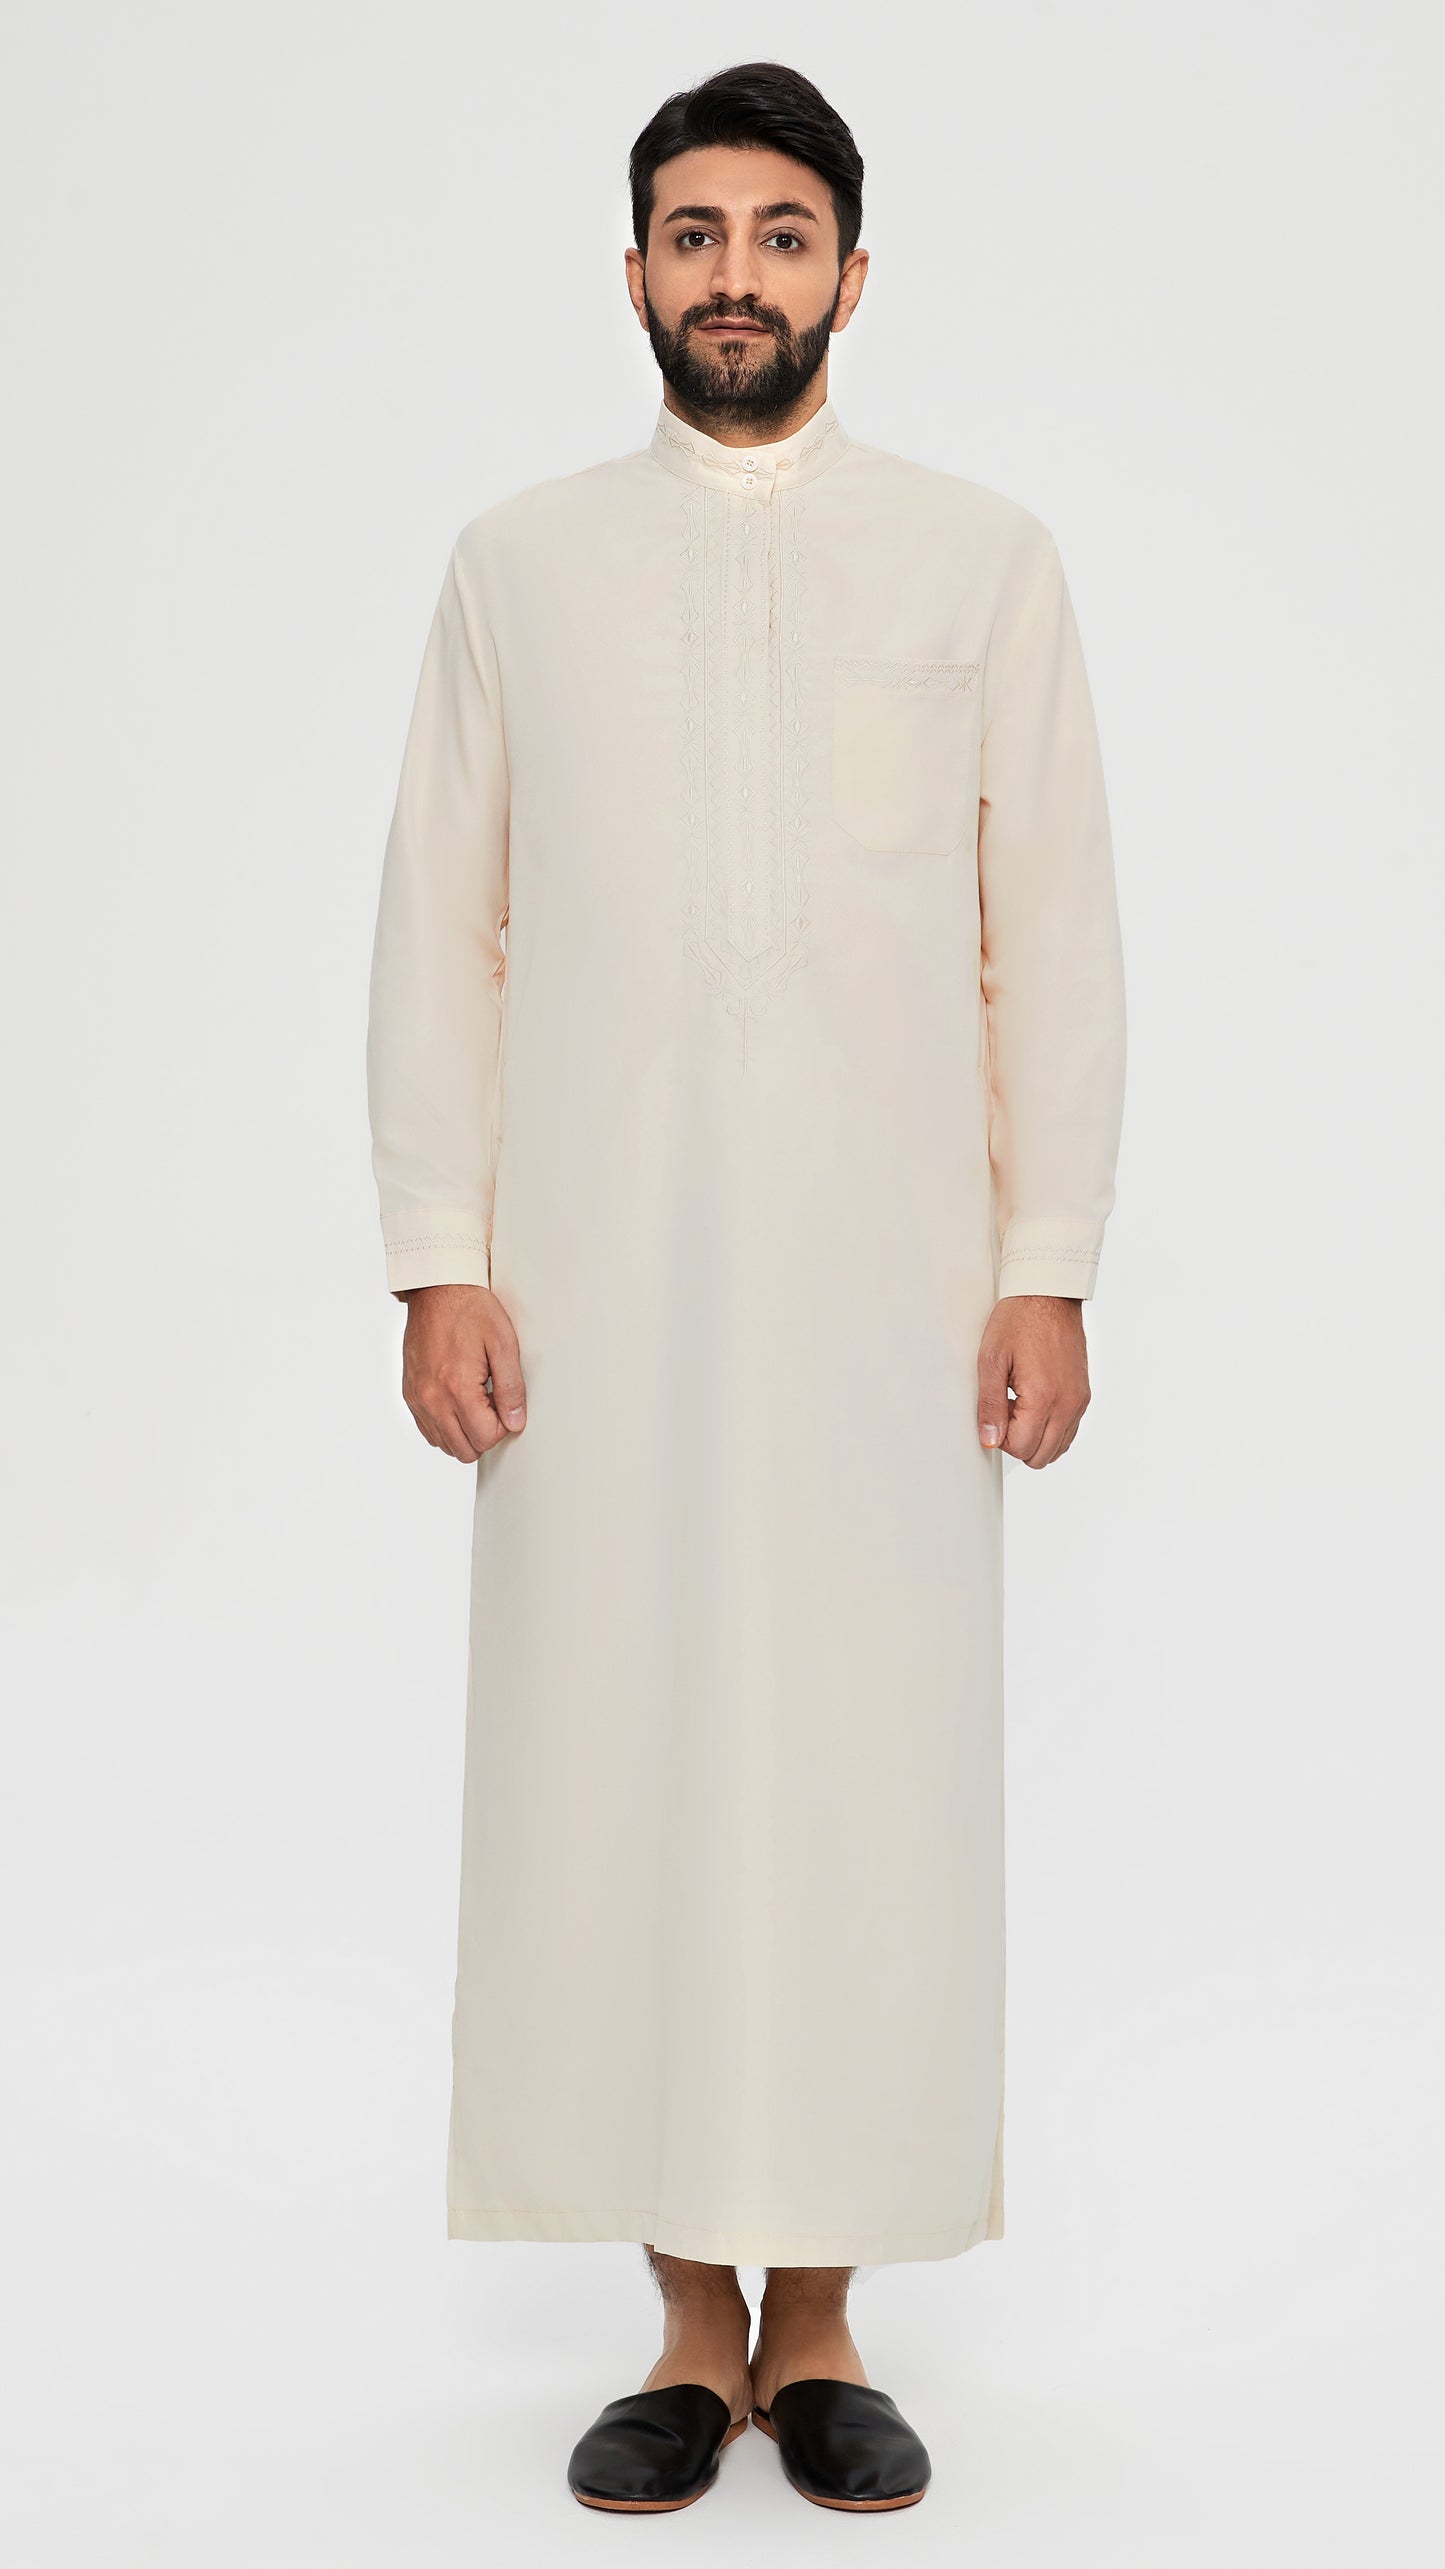 Qamis - Saudi Tan with chest embroidery